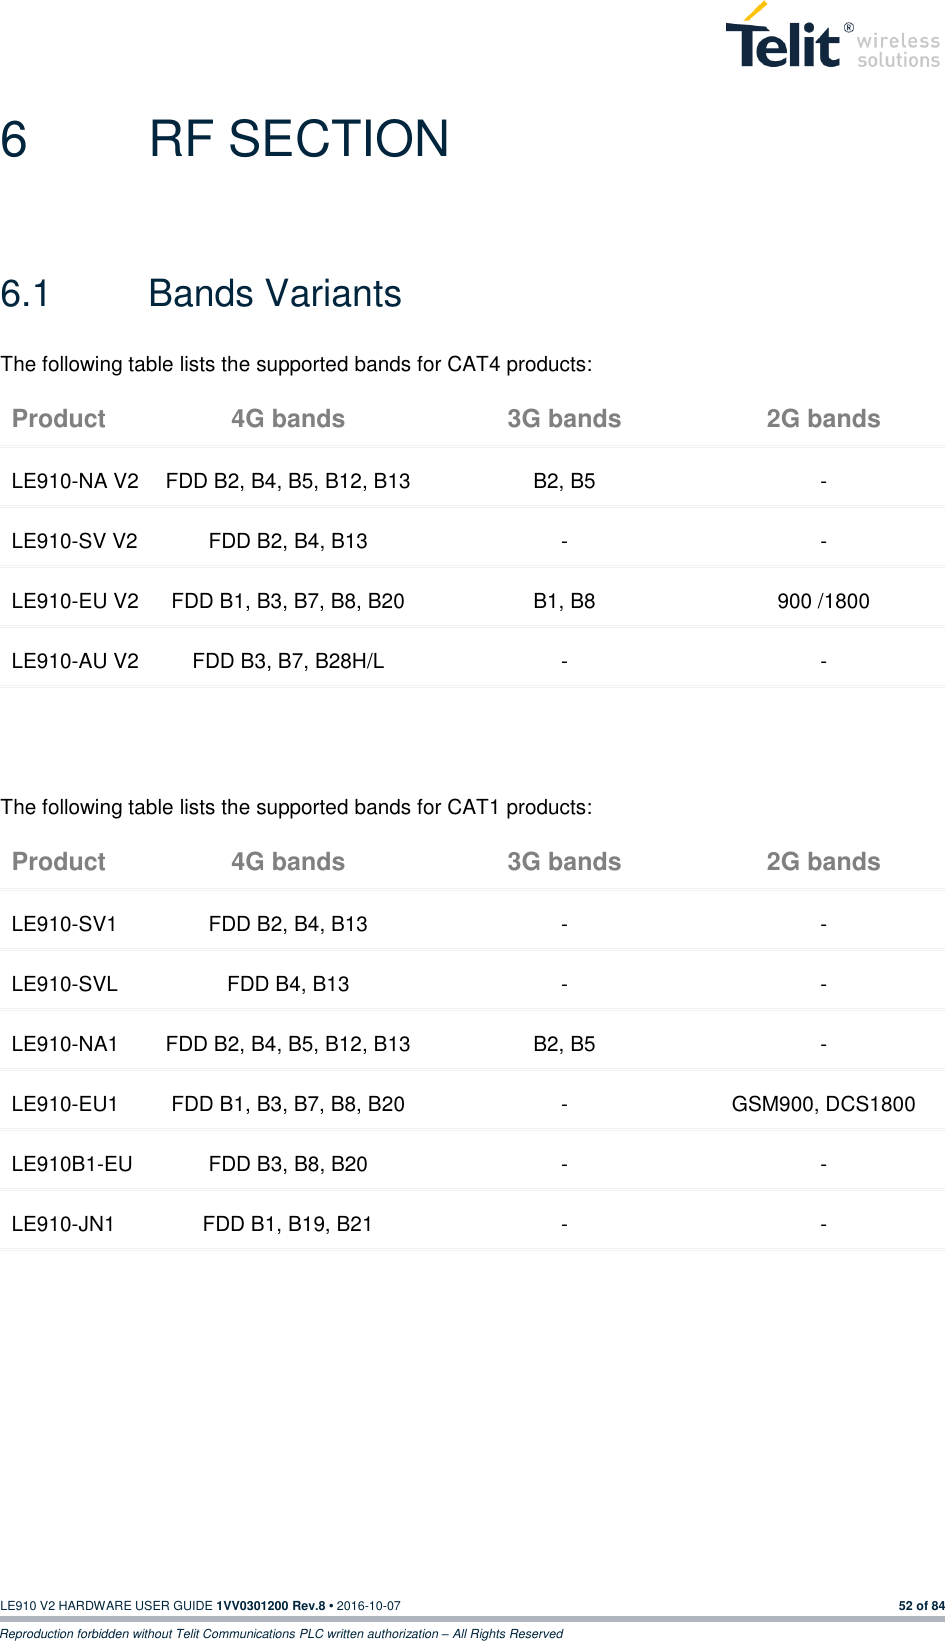   LE910 V2 HARDWARE USER GUIDE 1VV0301200 Rev.8 • 2016-10-07 52 of 84 Reproduction forbidden without Telit Communications PLC written authorization – All Rights Reserved 6  RF SECTION 6.1  Bands Variants The following table lists the supported bands for CAT4 products:    The following table lists the supported bands for CAT1 products:      Product 4G bands 3G bands 2G bands LE910-NA V2 FDD B2, B4, B5, B12, B13 B2, B5 - LE910-SV V2 FDD B2, B4, B13 - - LE910-EU V2 FDD B1, B3, B7, B8, B20 B1, B8 900 /1800 LE910-AU V2 FDD B3, B7, B28H/L - - Product 4G bands 3G bands 2G bands LE910-SV1 FDD B2, B4, B13 - - LE910-SVL FDD B4, B13 - - LE910-NA1 FDD B2, B4, B5, B12, B13 B2, B5 - LE910-EU1 FDD B1, B3, B7, B8, B20 - GSM900, DCS1800 LE910B1-EU FDD B3, B8, B20 - - LE910-JN1 FDD B1, B19, B21 - - 